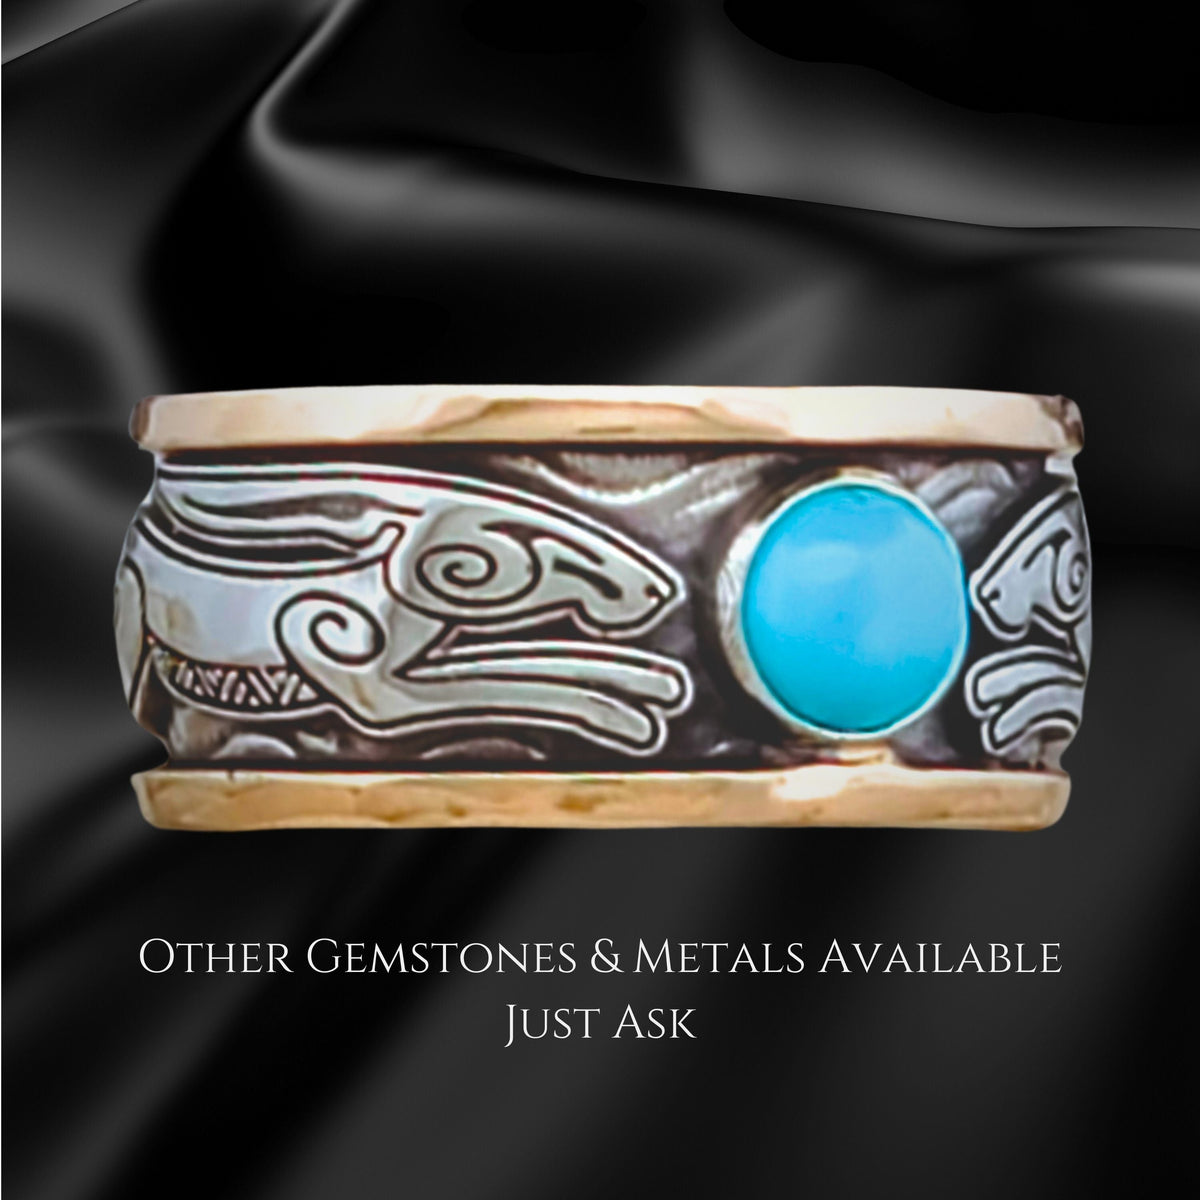 FREYJA&#39;S HARES SOLITAIRE BAND RING with TURQUOISE CABACHON 14KT GOLD